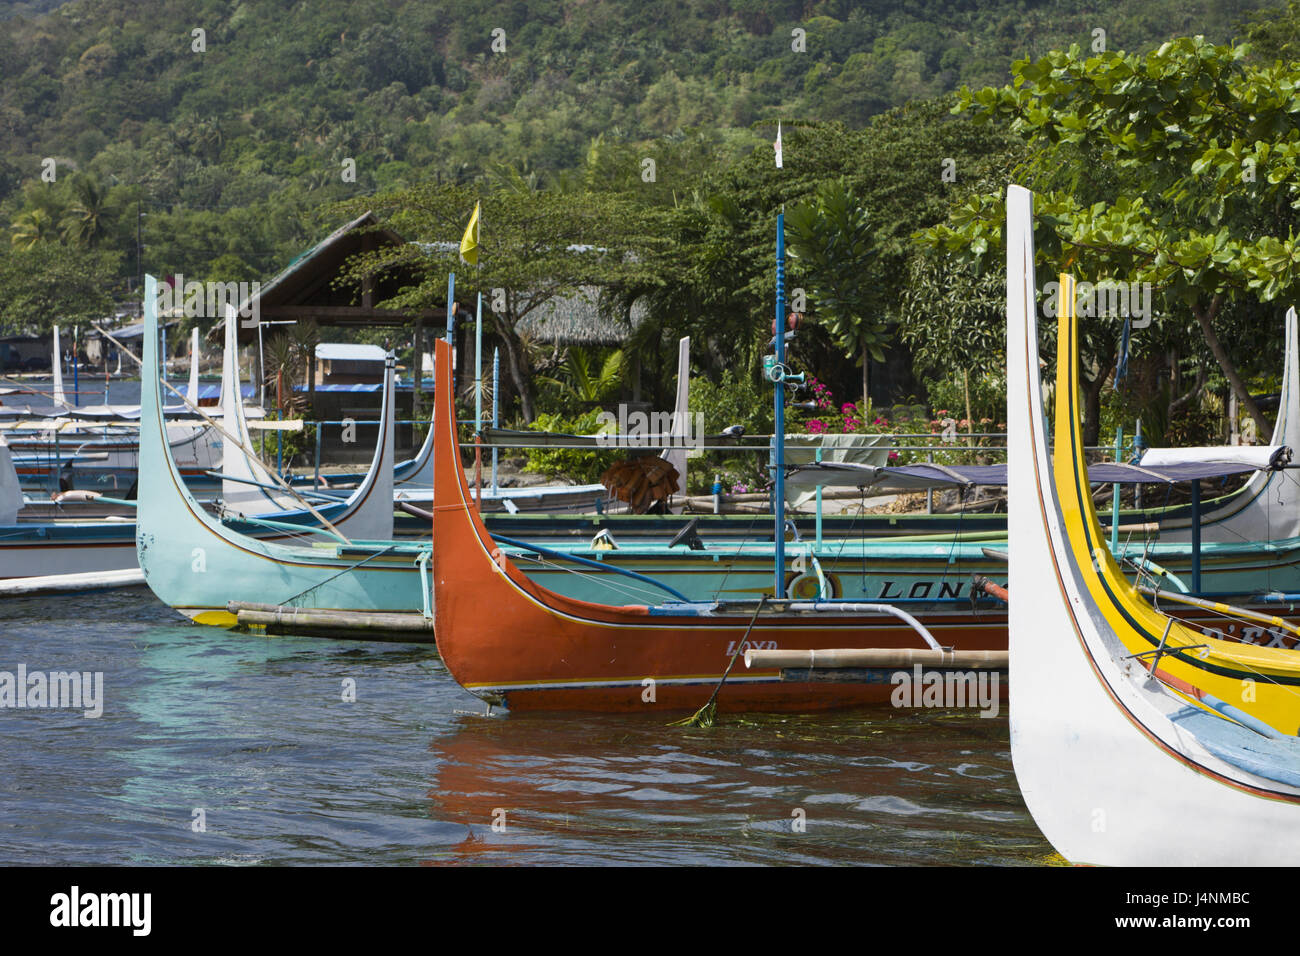 The Philippines, island Luzon, Taal lake, boats, detail, Stock Photo